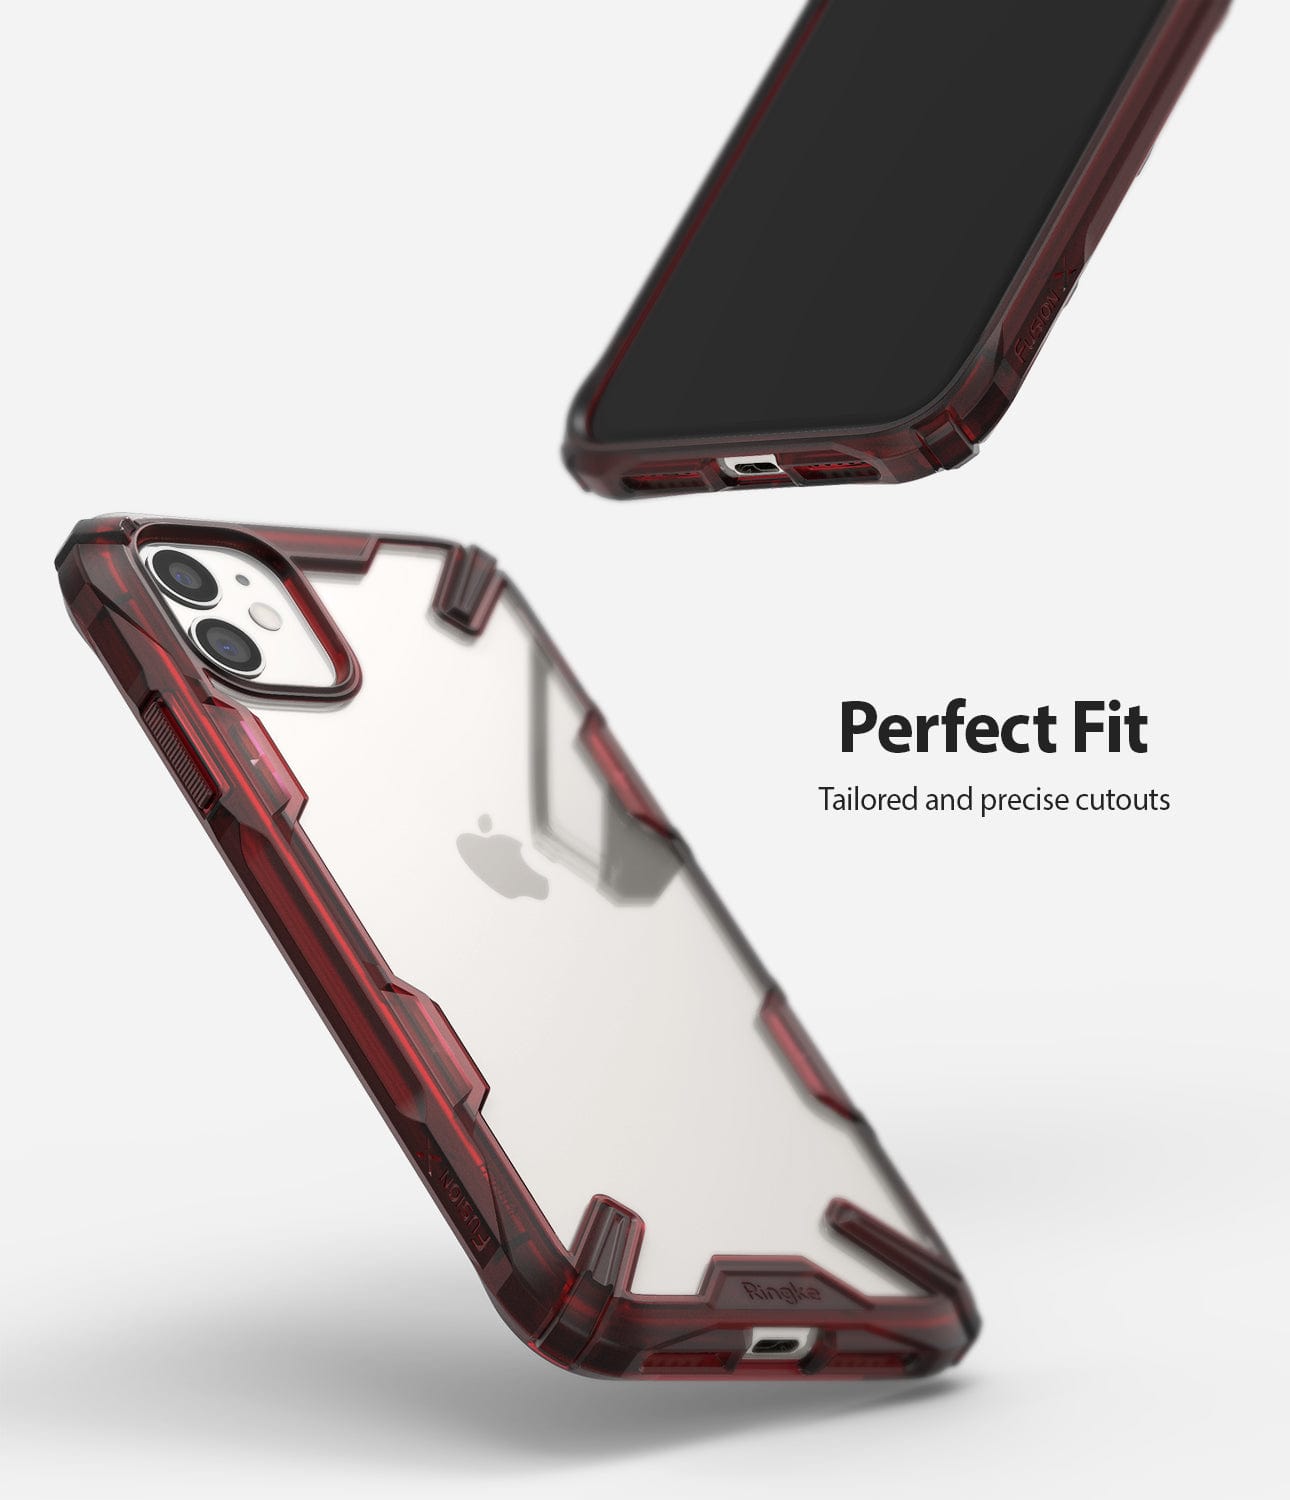 iPhone 11 case Ruby Red Fusion-X by Ringke